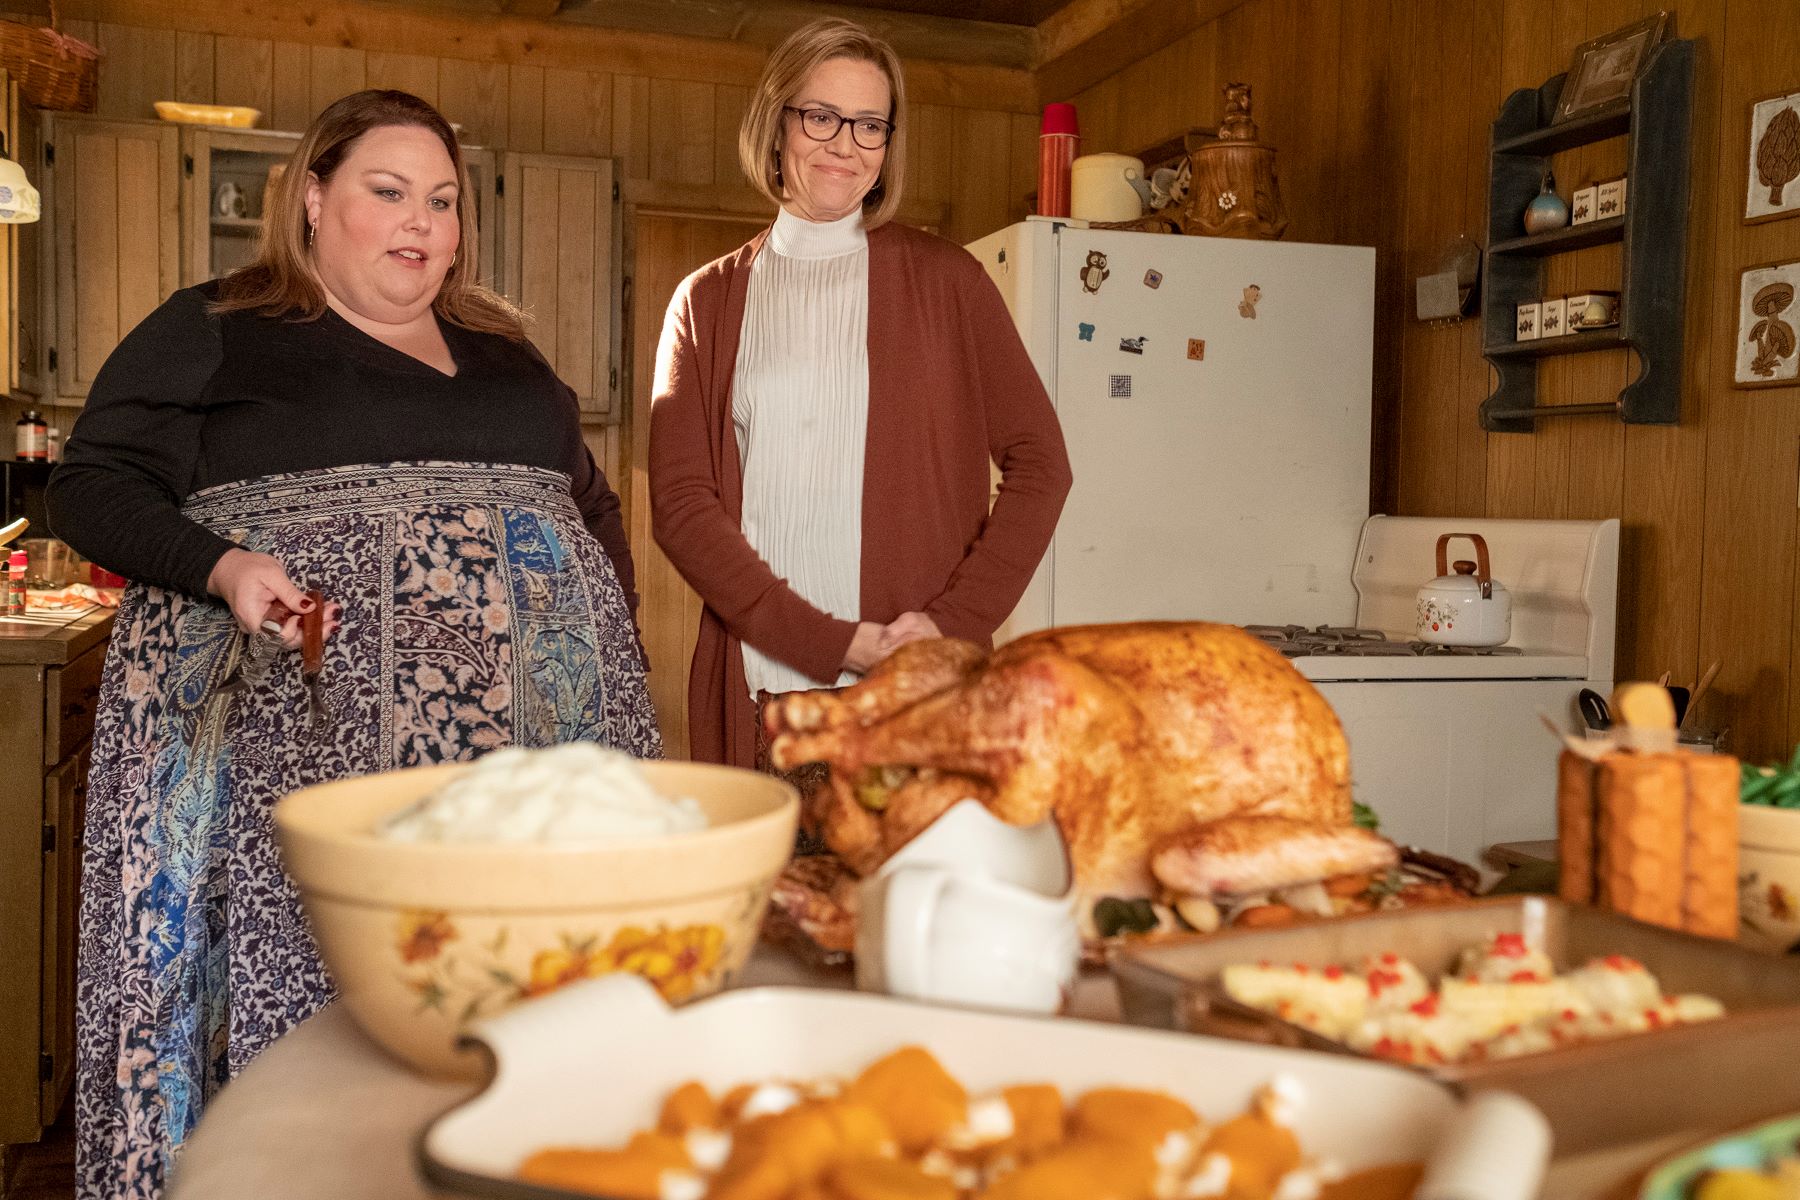 Chrissy Metz and Mandy Moore, in character as Kate and Rebecca in 'This Is Us' Season 6 Episode 7, admire their Thanksgiving dinner. Kate wears a black long-sleeved top and long blue paisley skirt. Rebecca wears a red-brown cardigan over a white turtleneck.